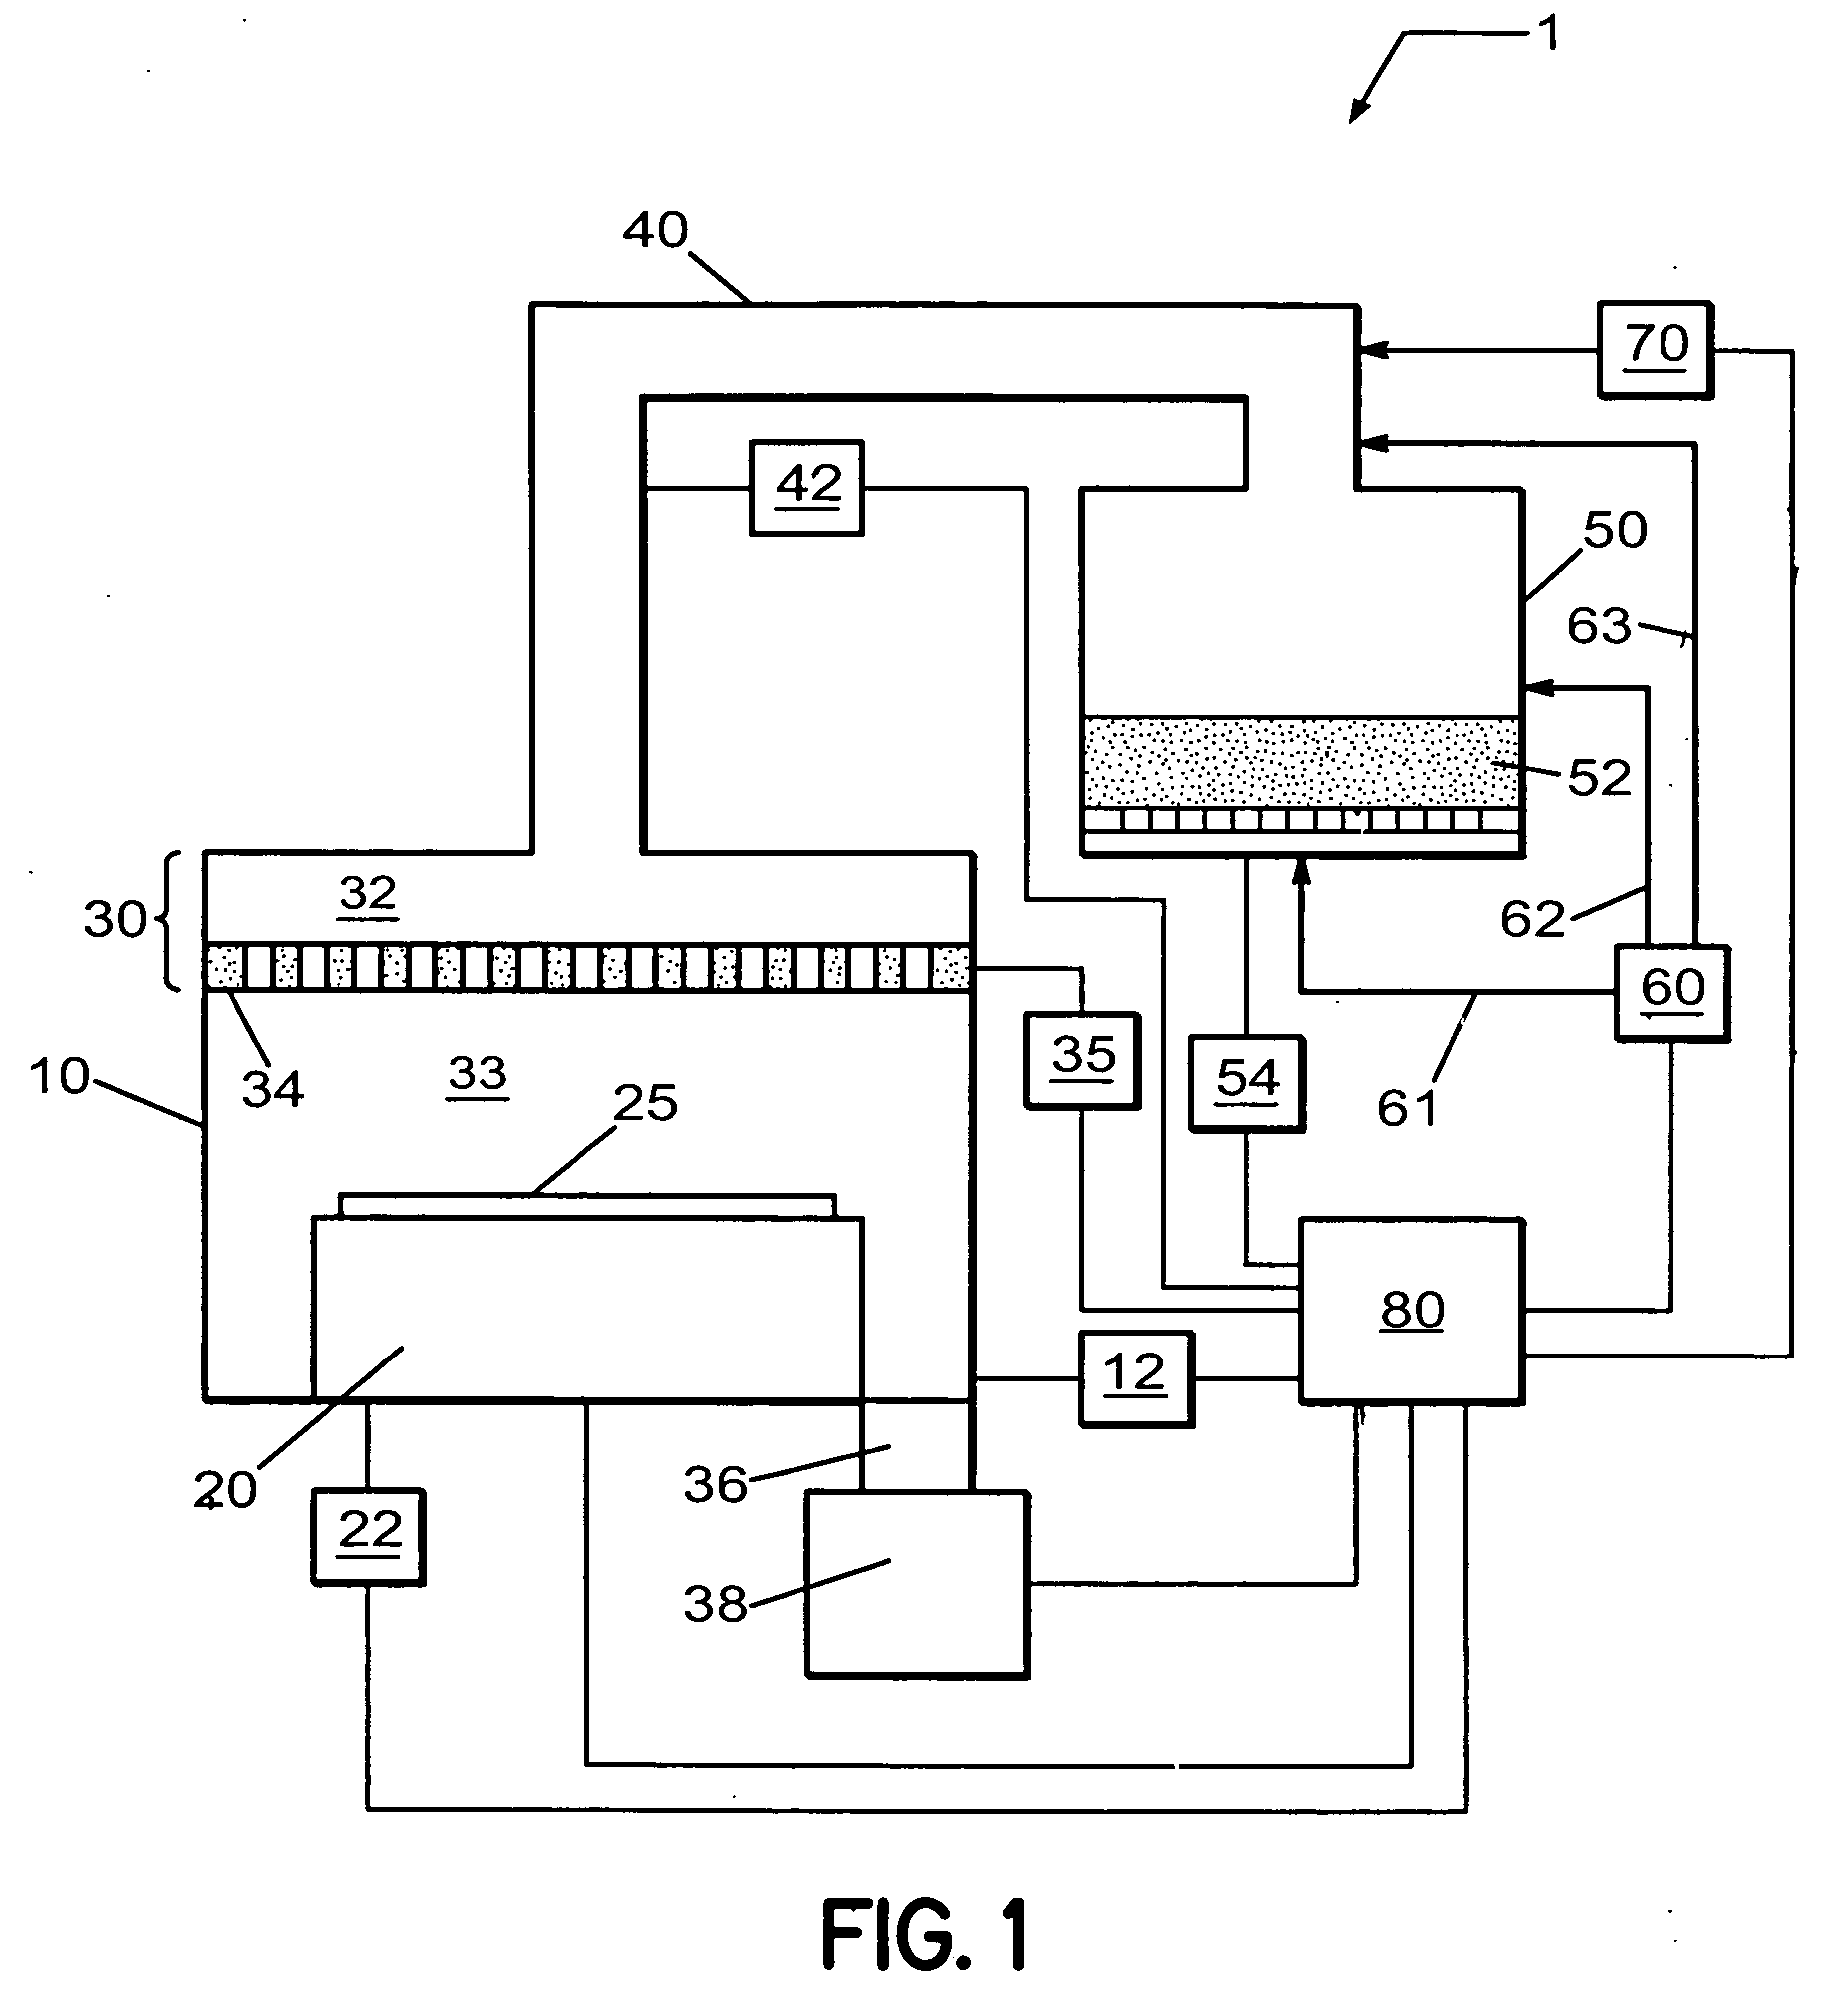 Method and system for performing in-situ cleaning of a deposition system